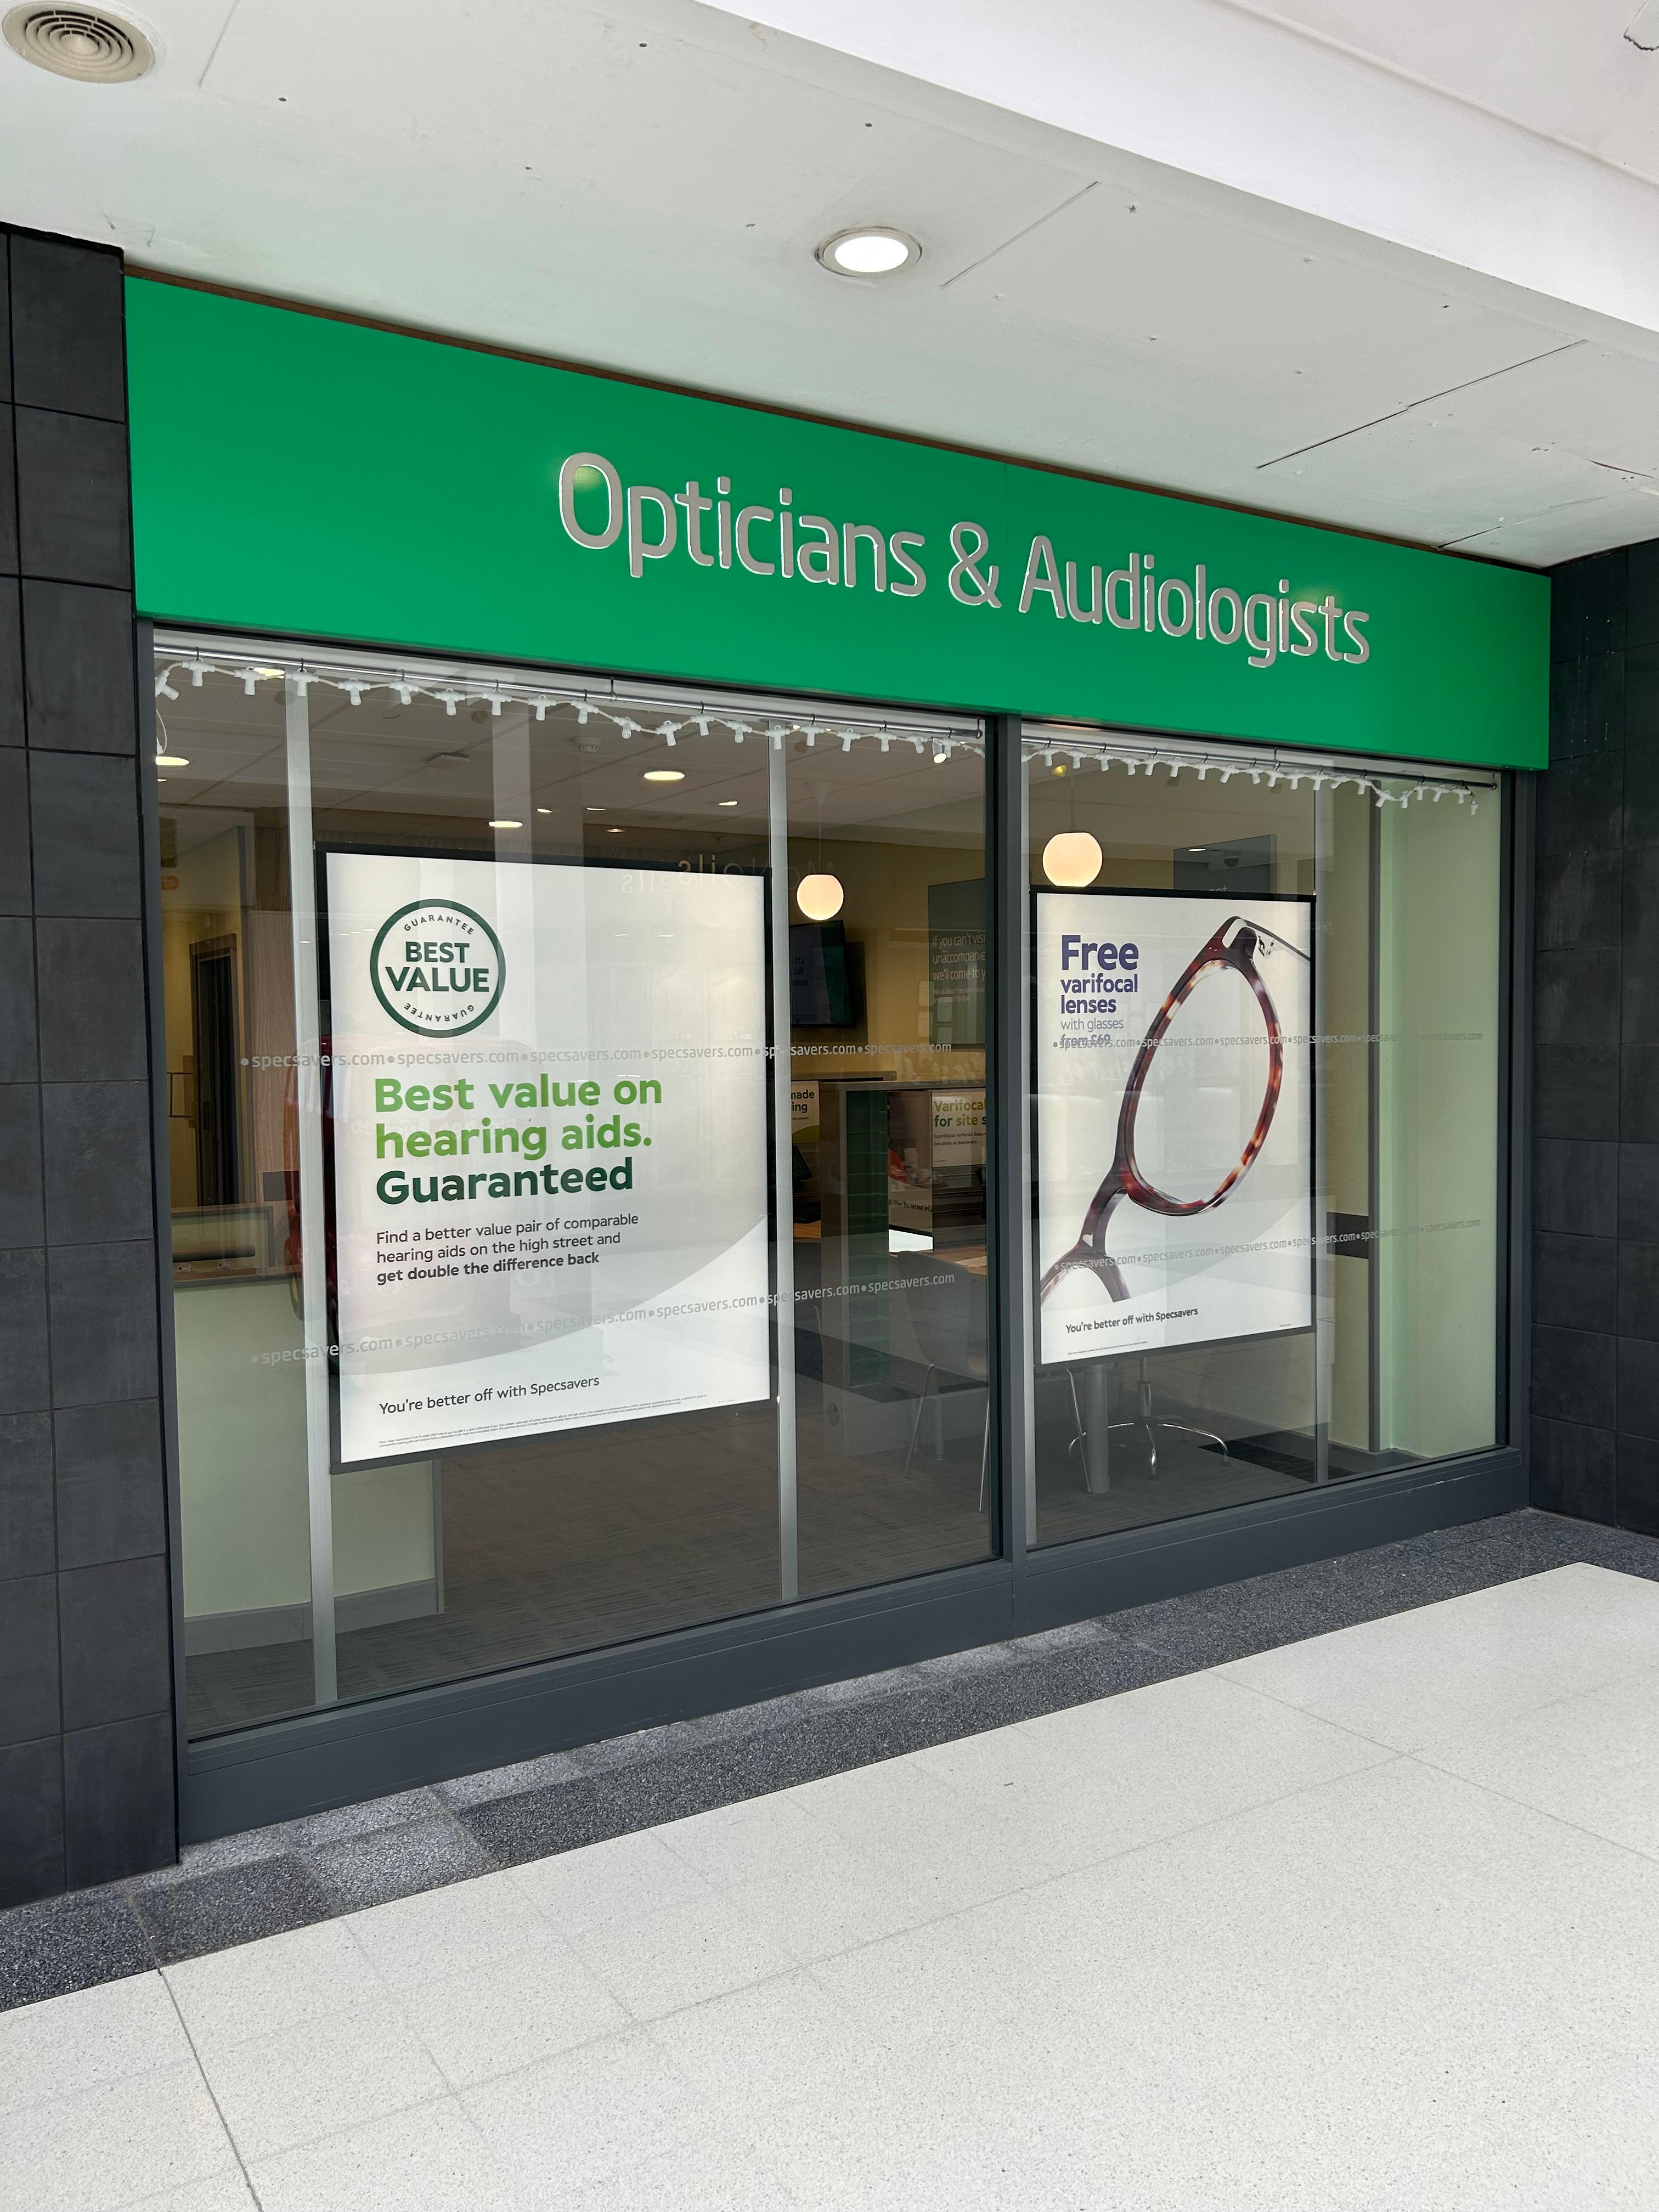 Specsavers Opticians and Audiologists - Greenock Specsavers Opticians and Audiologists - Greenock Greenock 01475 724404